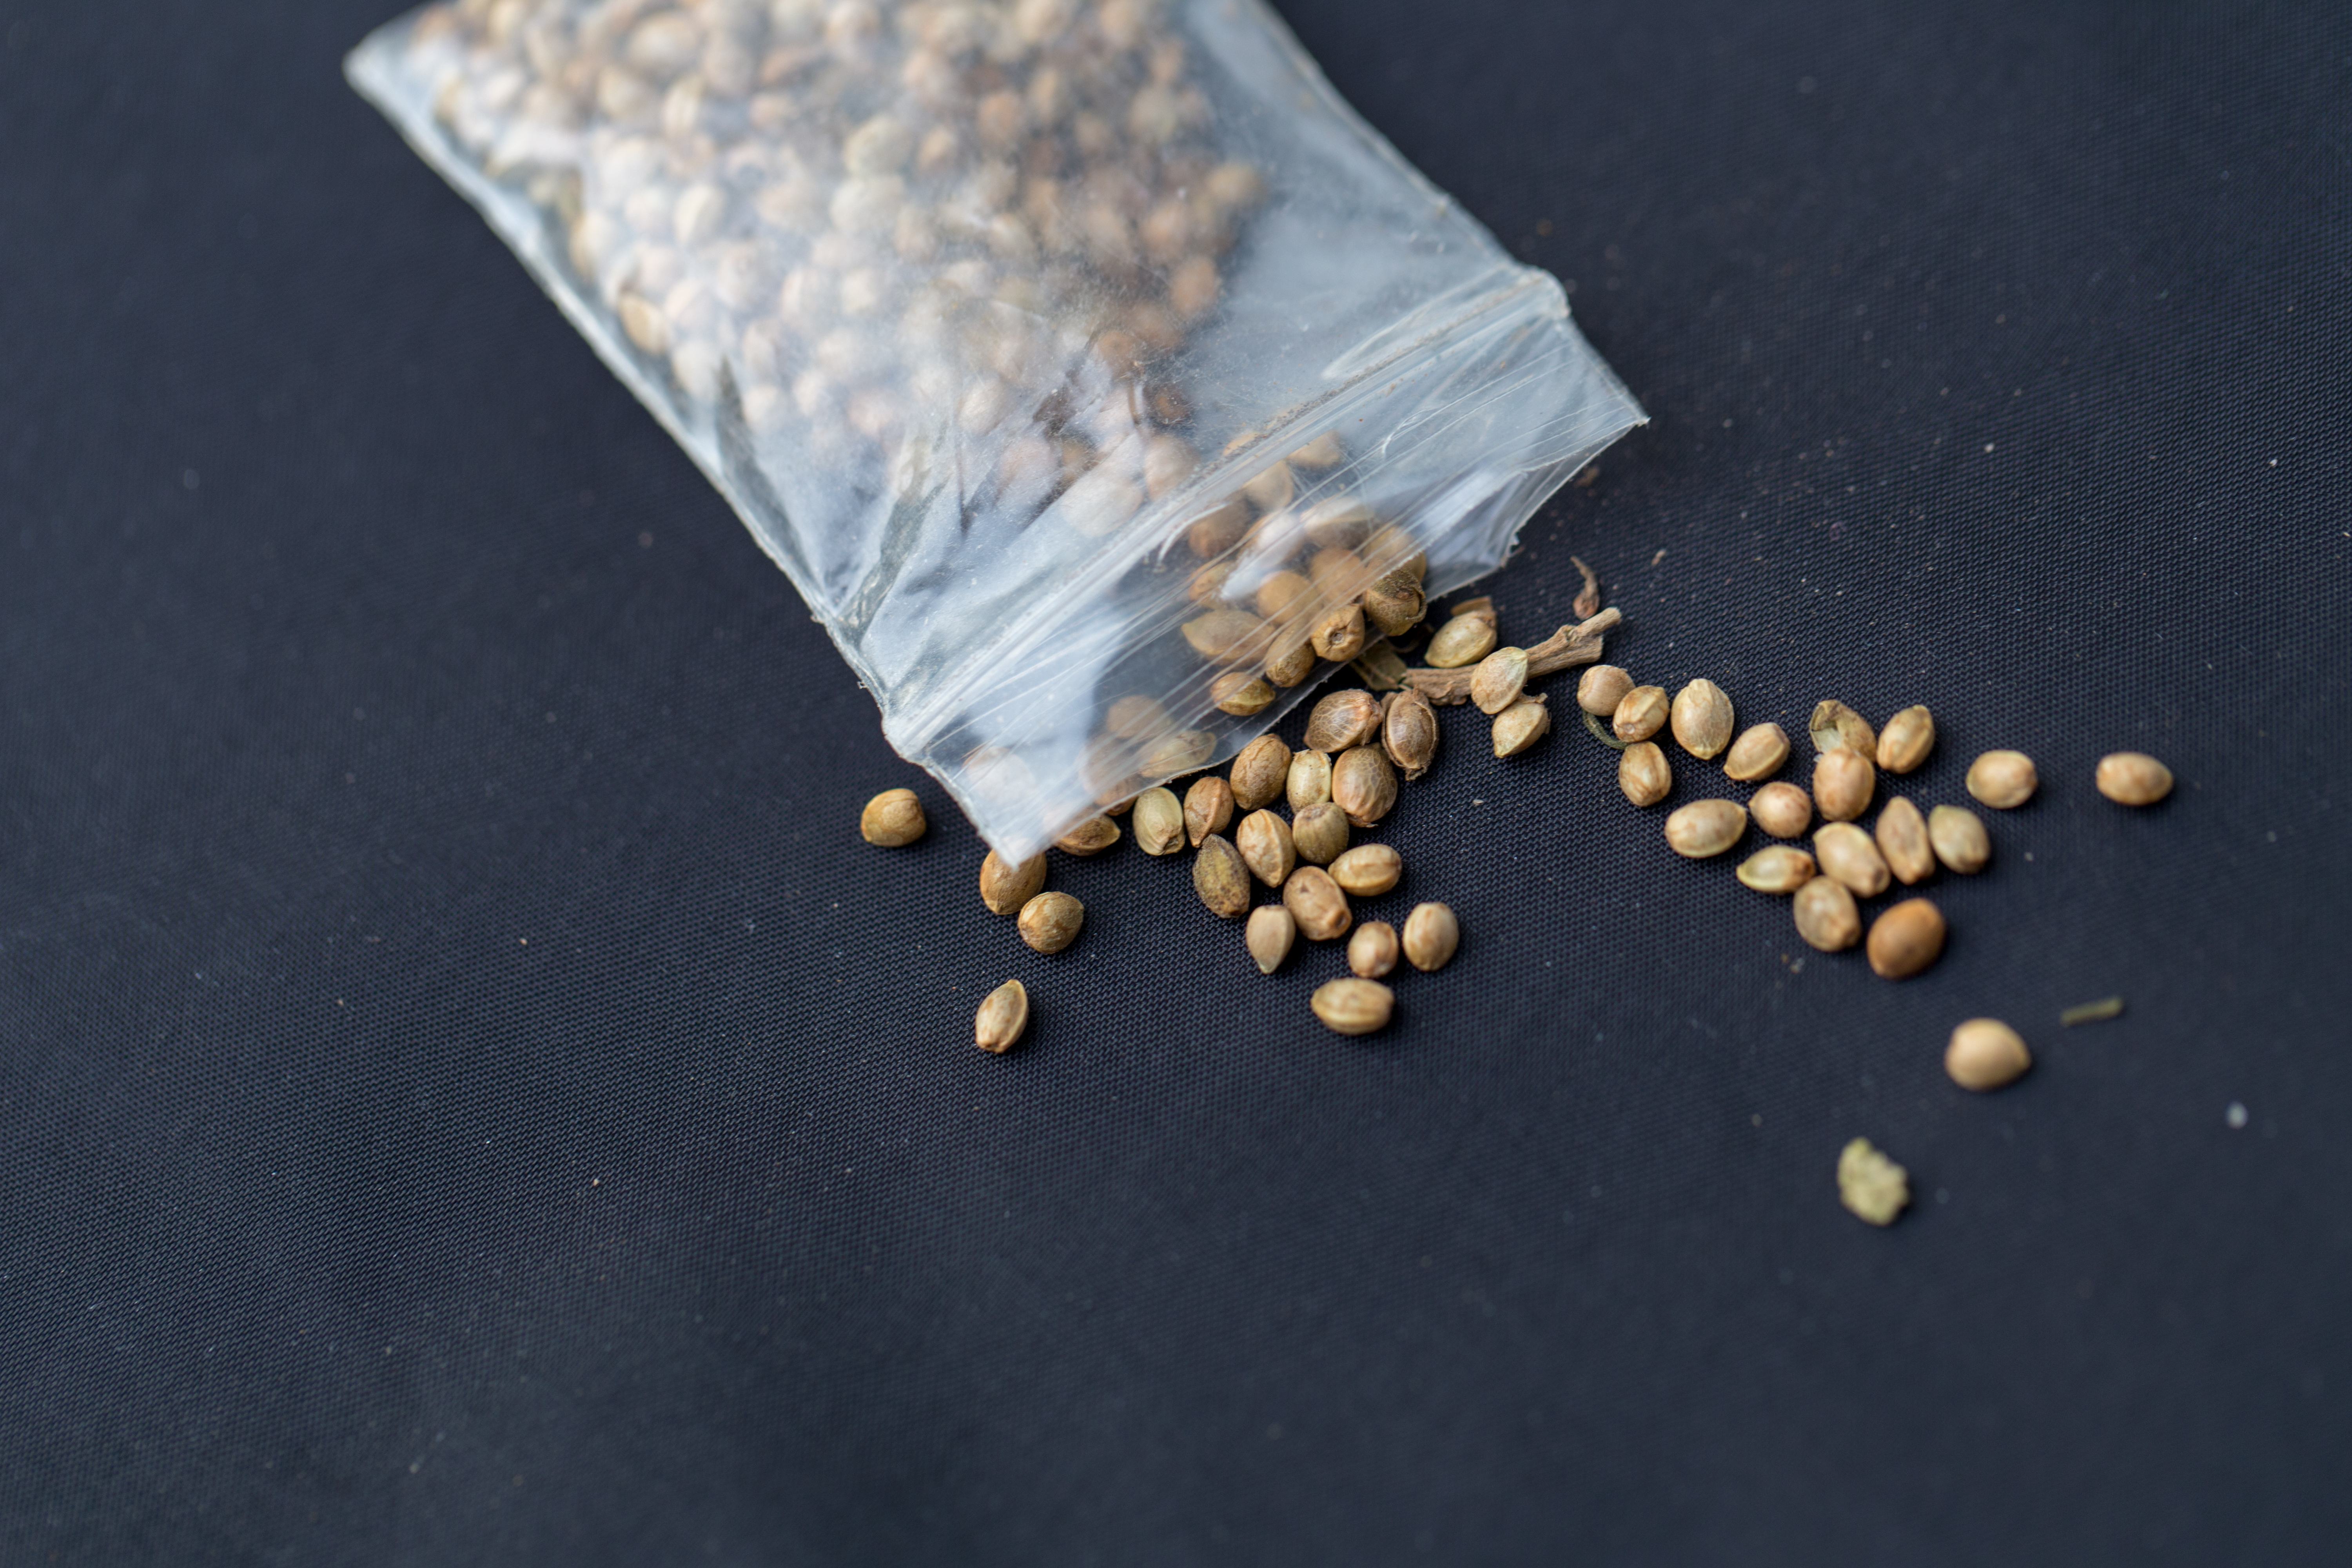 Cannabis seeds are spilled out of an open bag on a table.